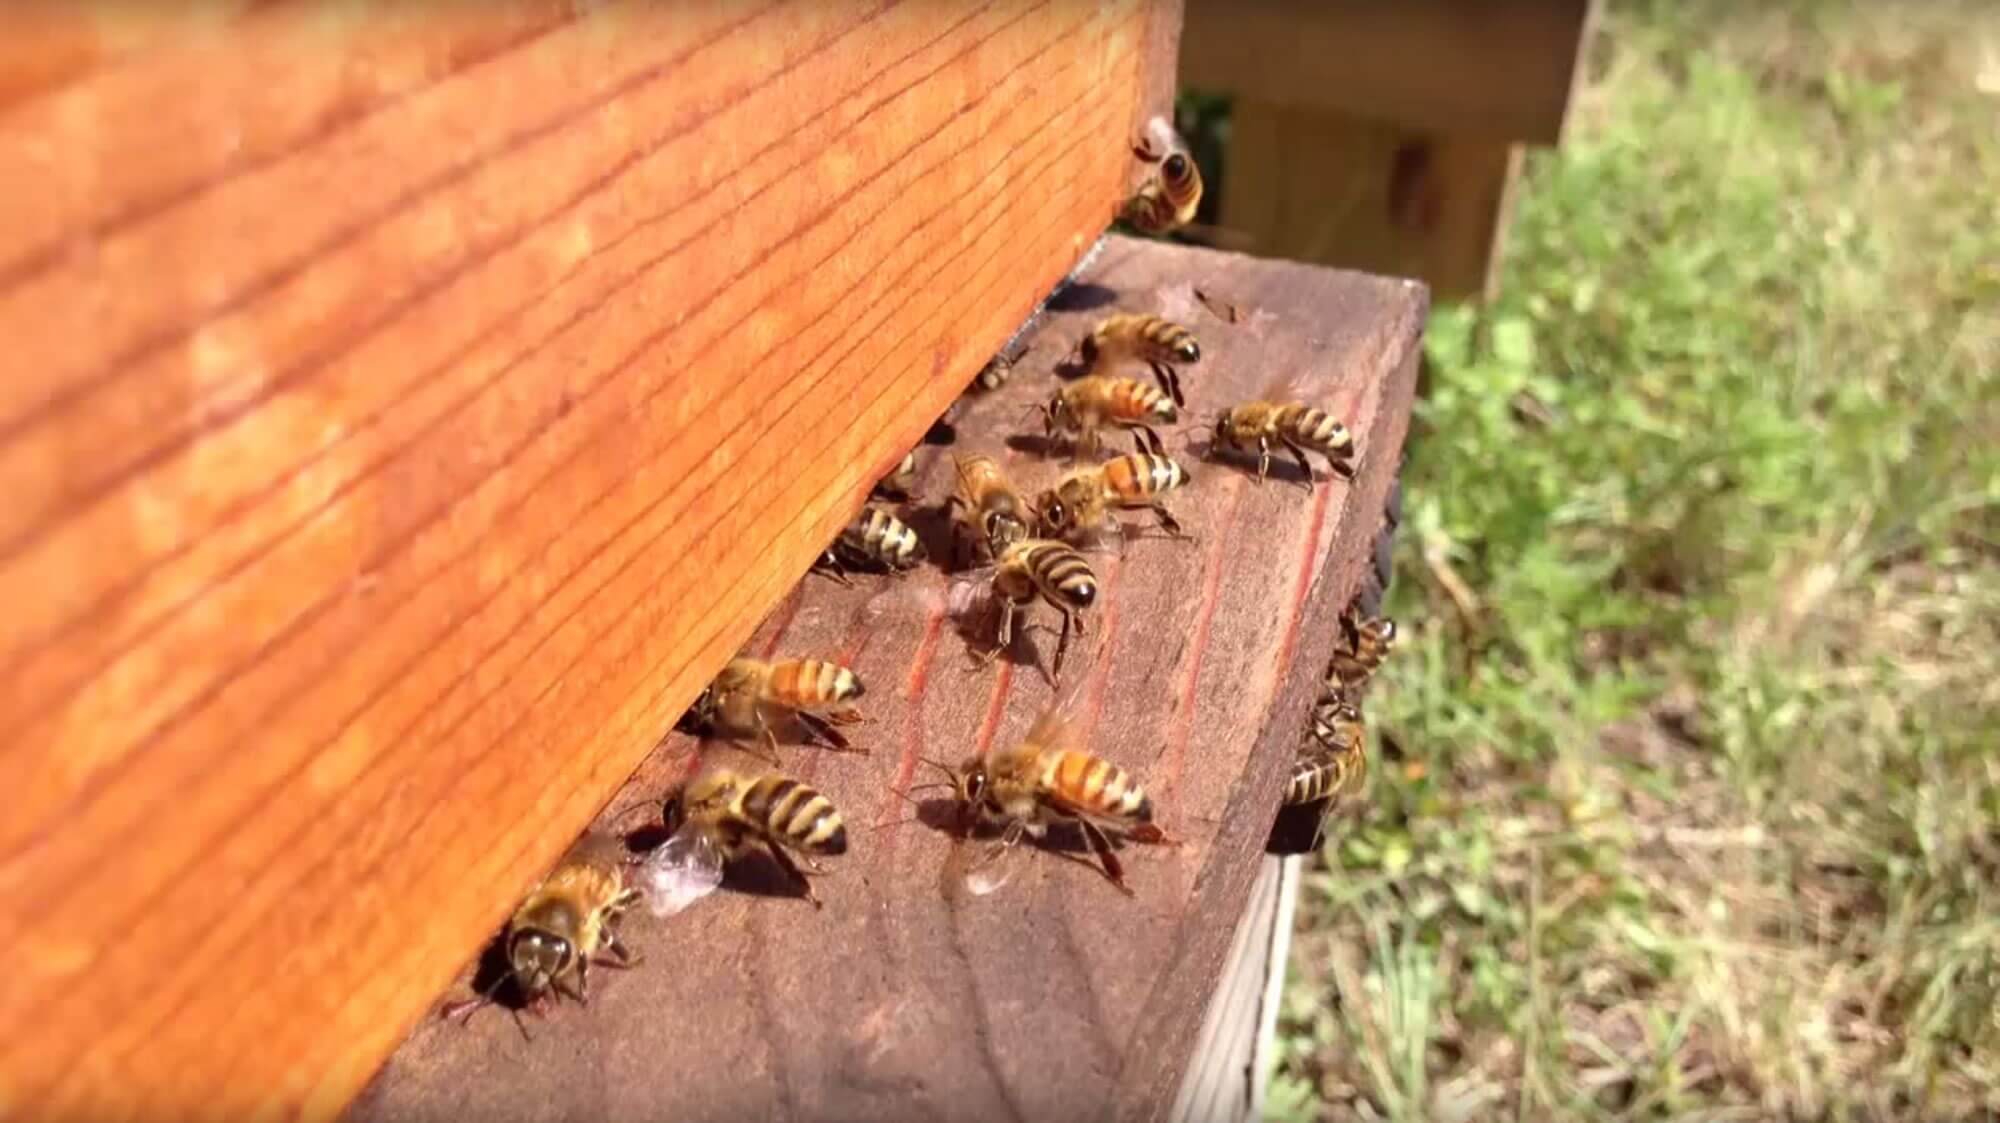 The Sweet Business of the Humble Honey Bee